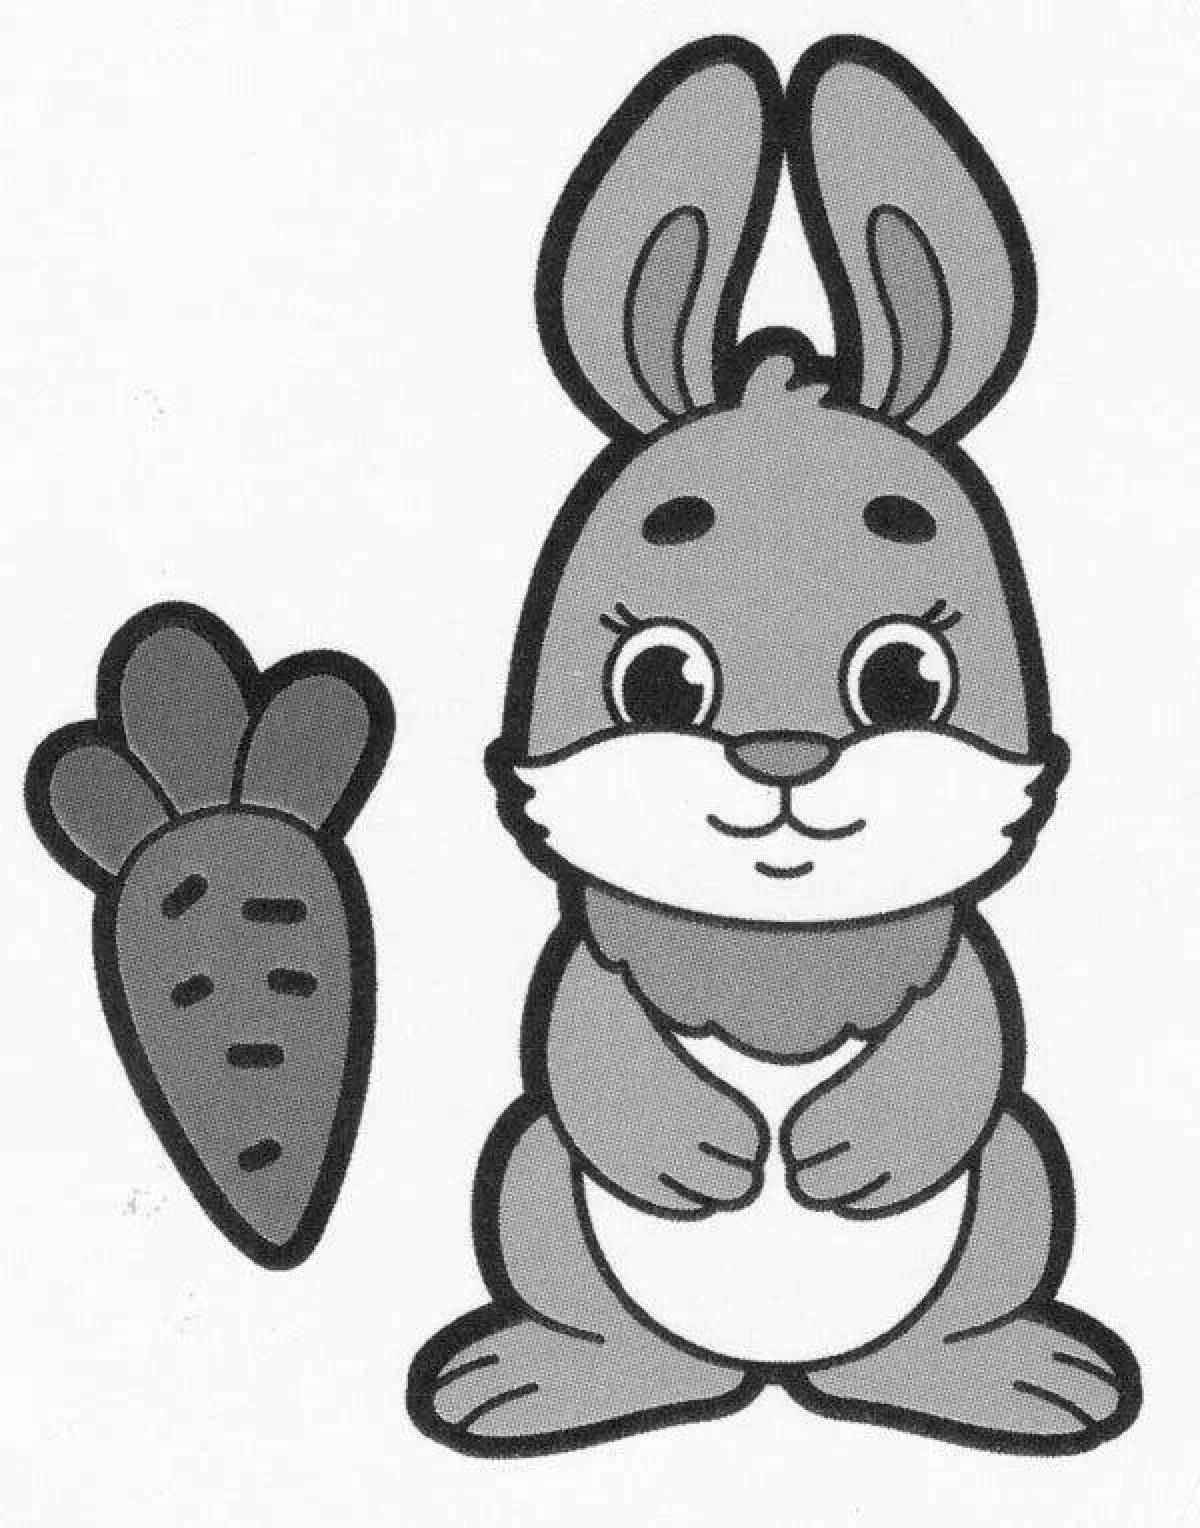 Sunny bunny coloring book